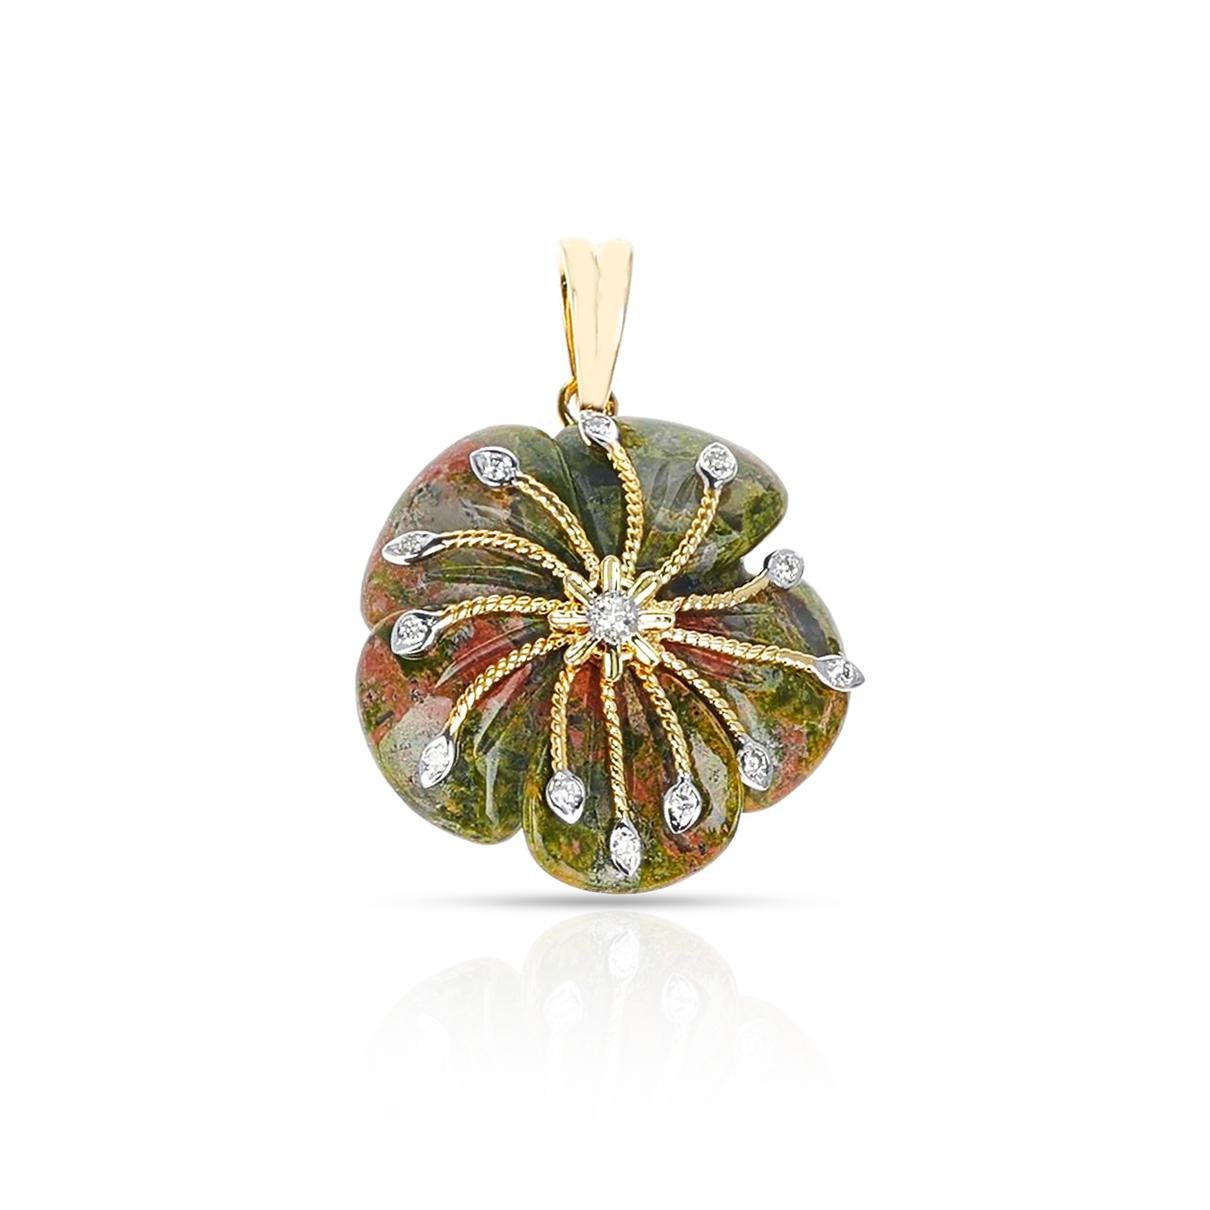 A beautiful Unakite Carved Floral Pendant with 14k Goldwork and Diamonds. The unakite weighs 23.90 carats. The diamonds weigh 0.14 carats. The length is 1.25 inches. The total weight of the pendant is 6.86 grams. 